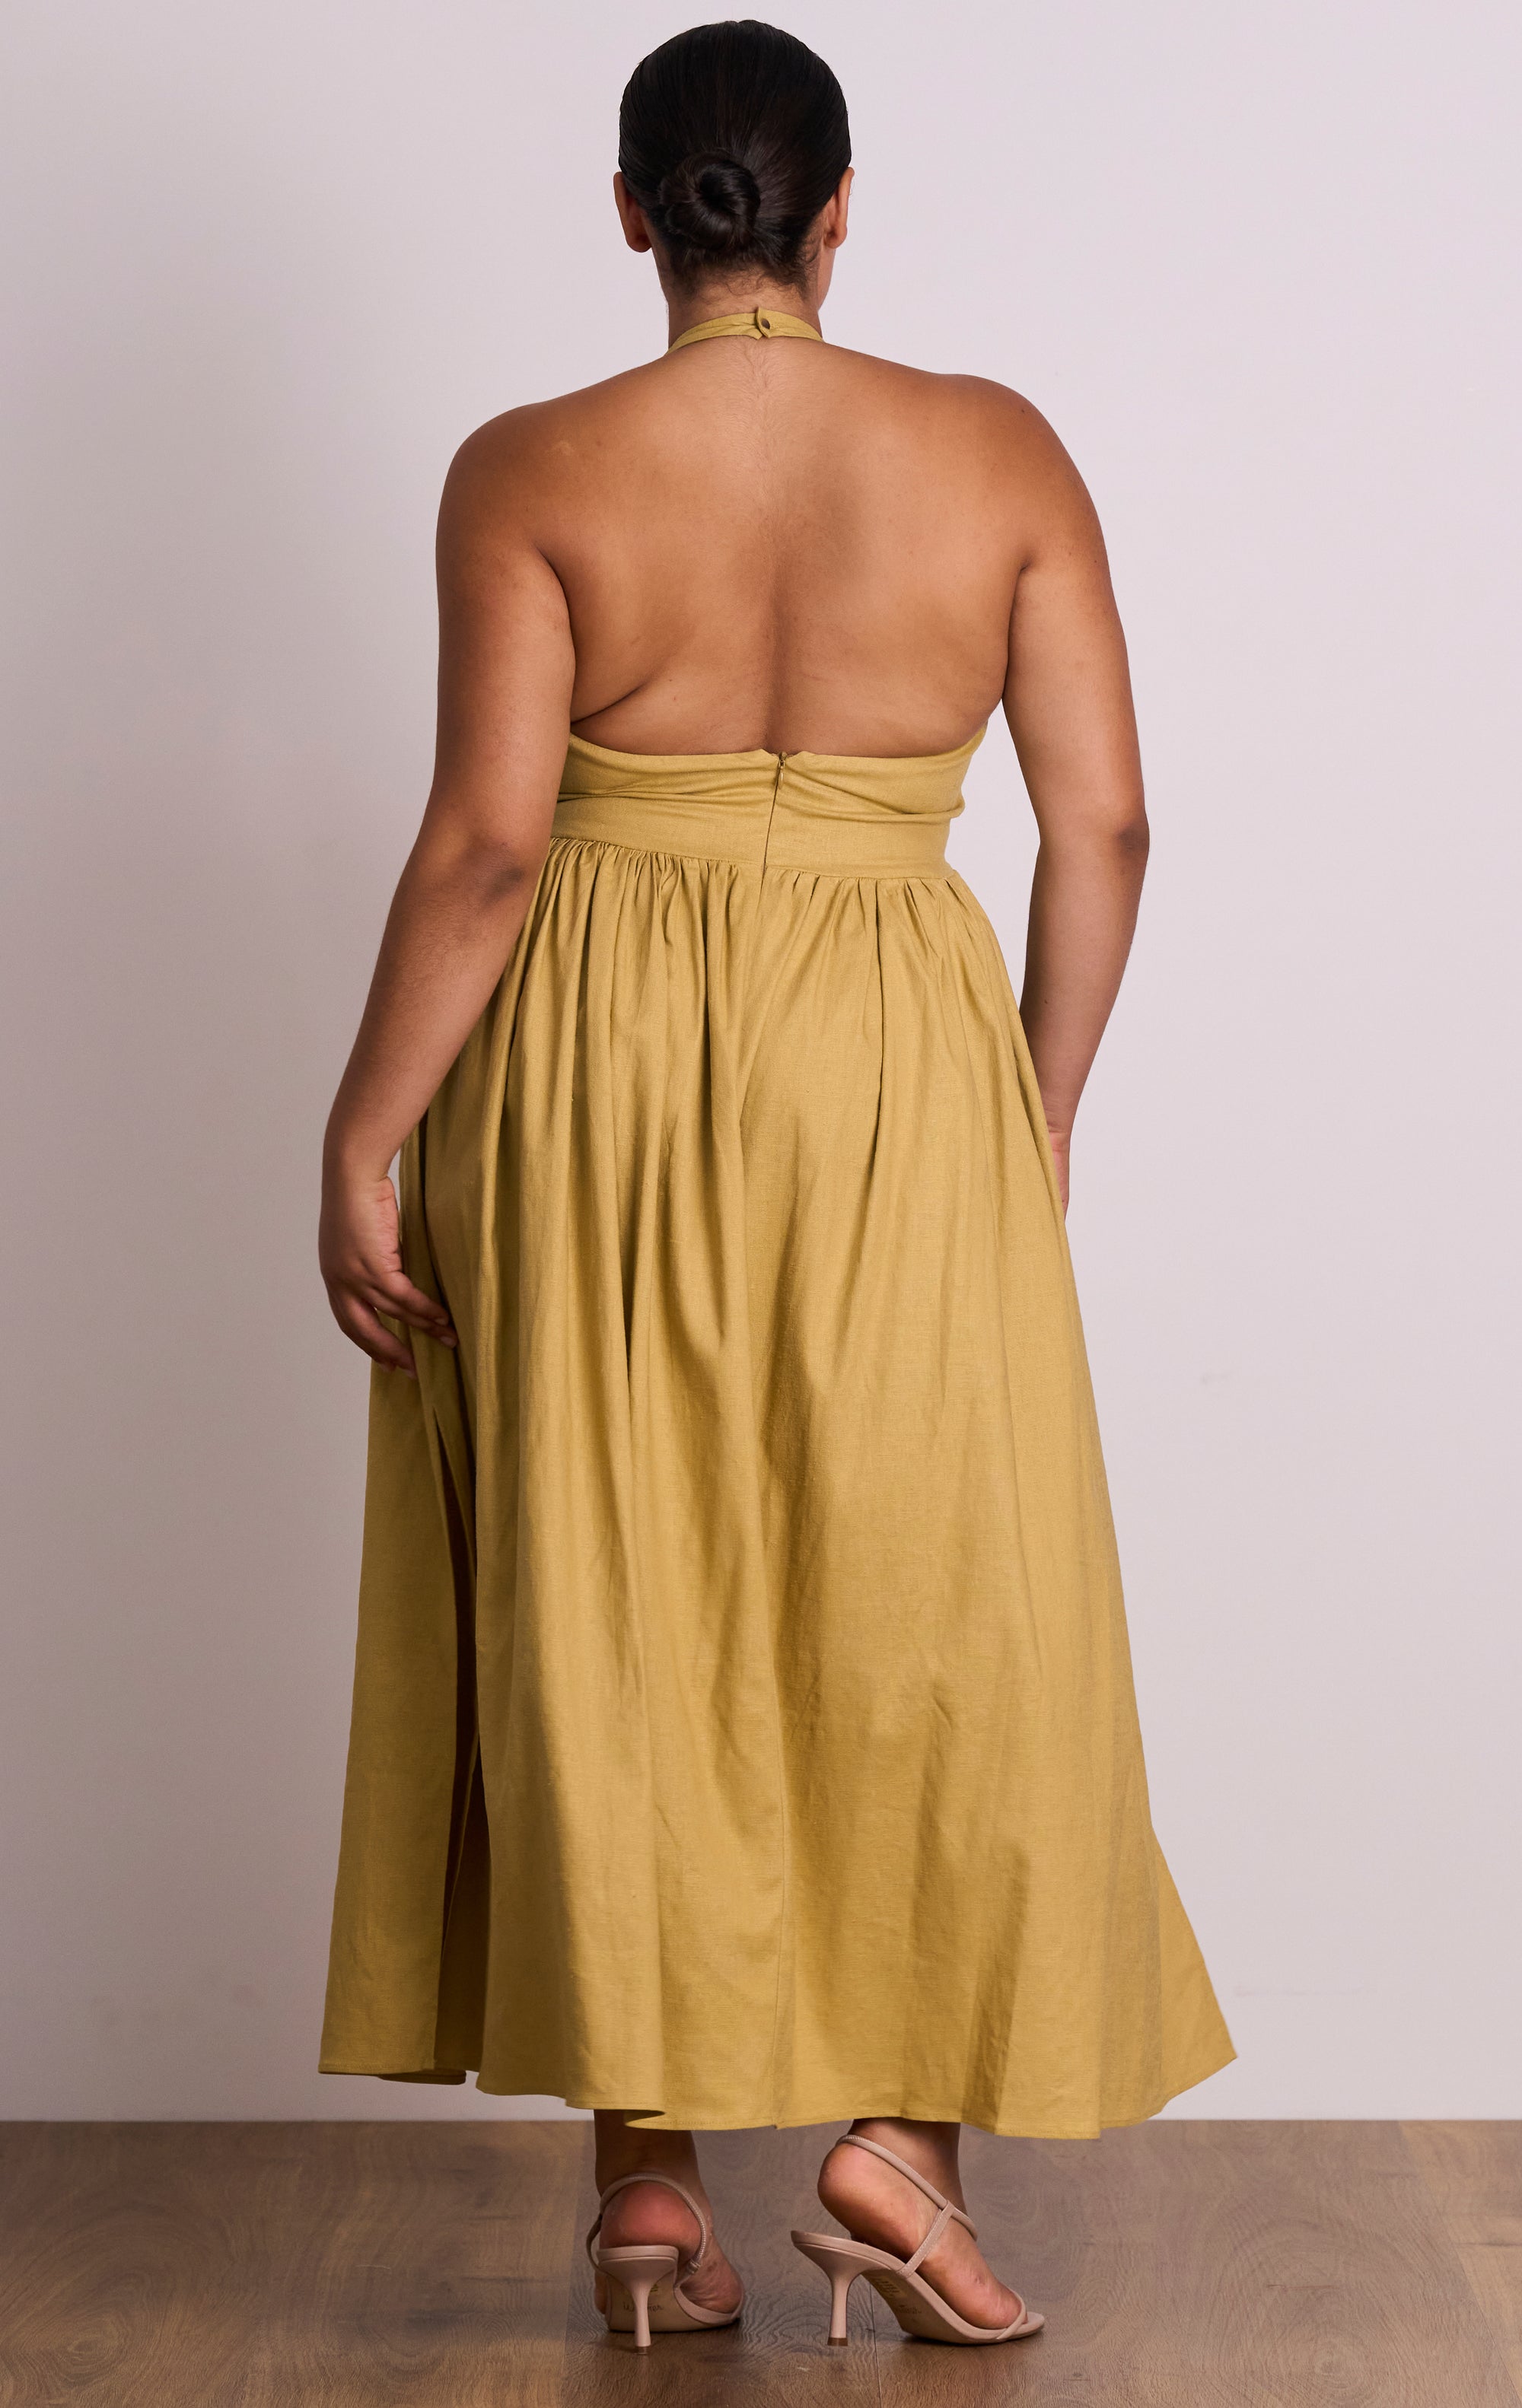 Joyride Halter Midi - TAKE 40% OFF DISCOUNT APPLIED AT CHECKOUT